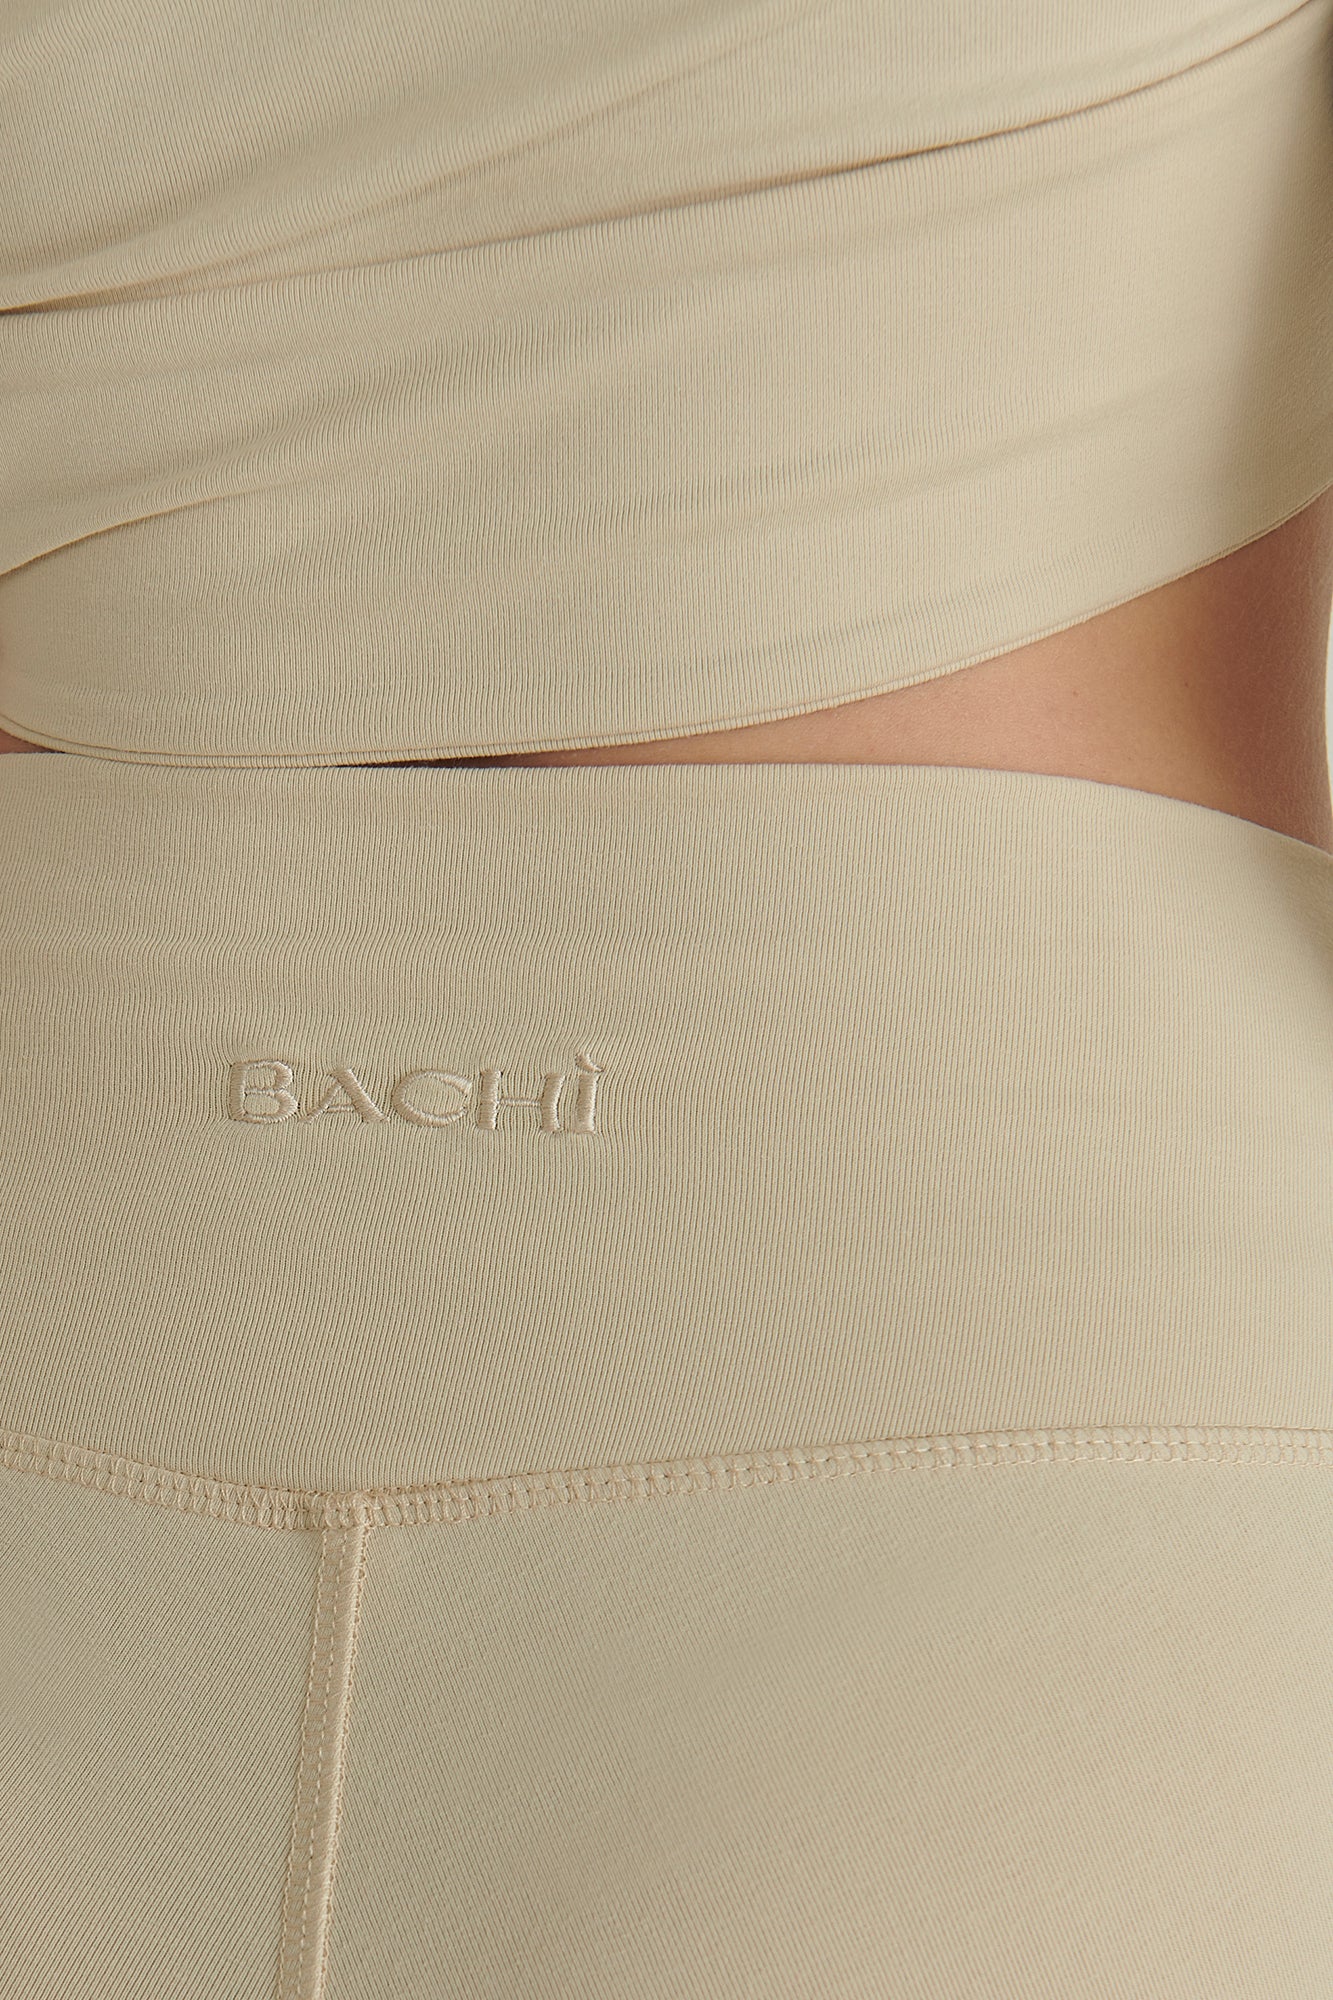 Beige Details of the BACHI Vital Collection